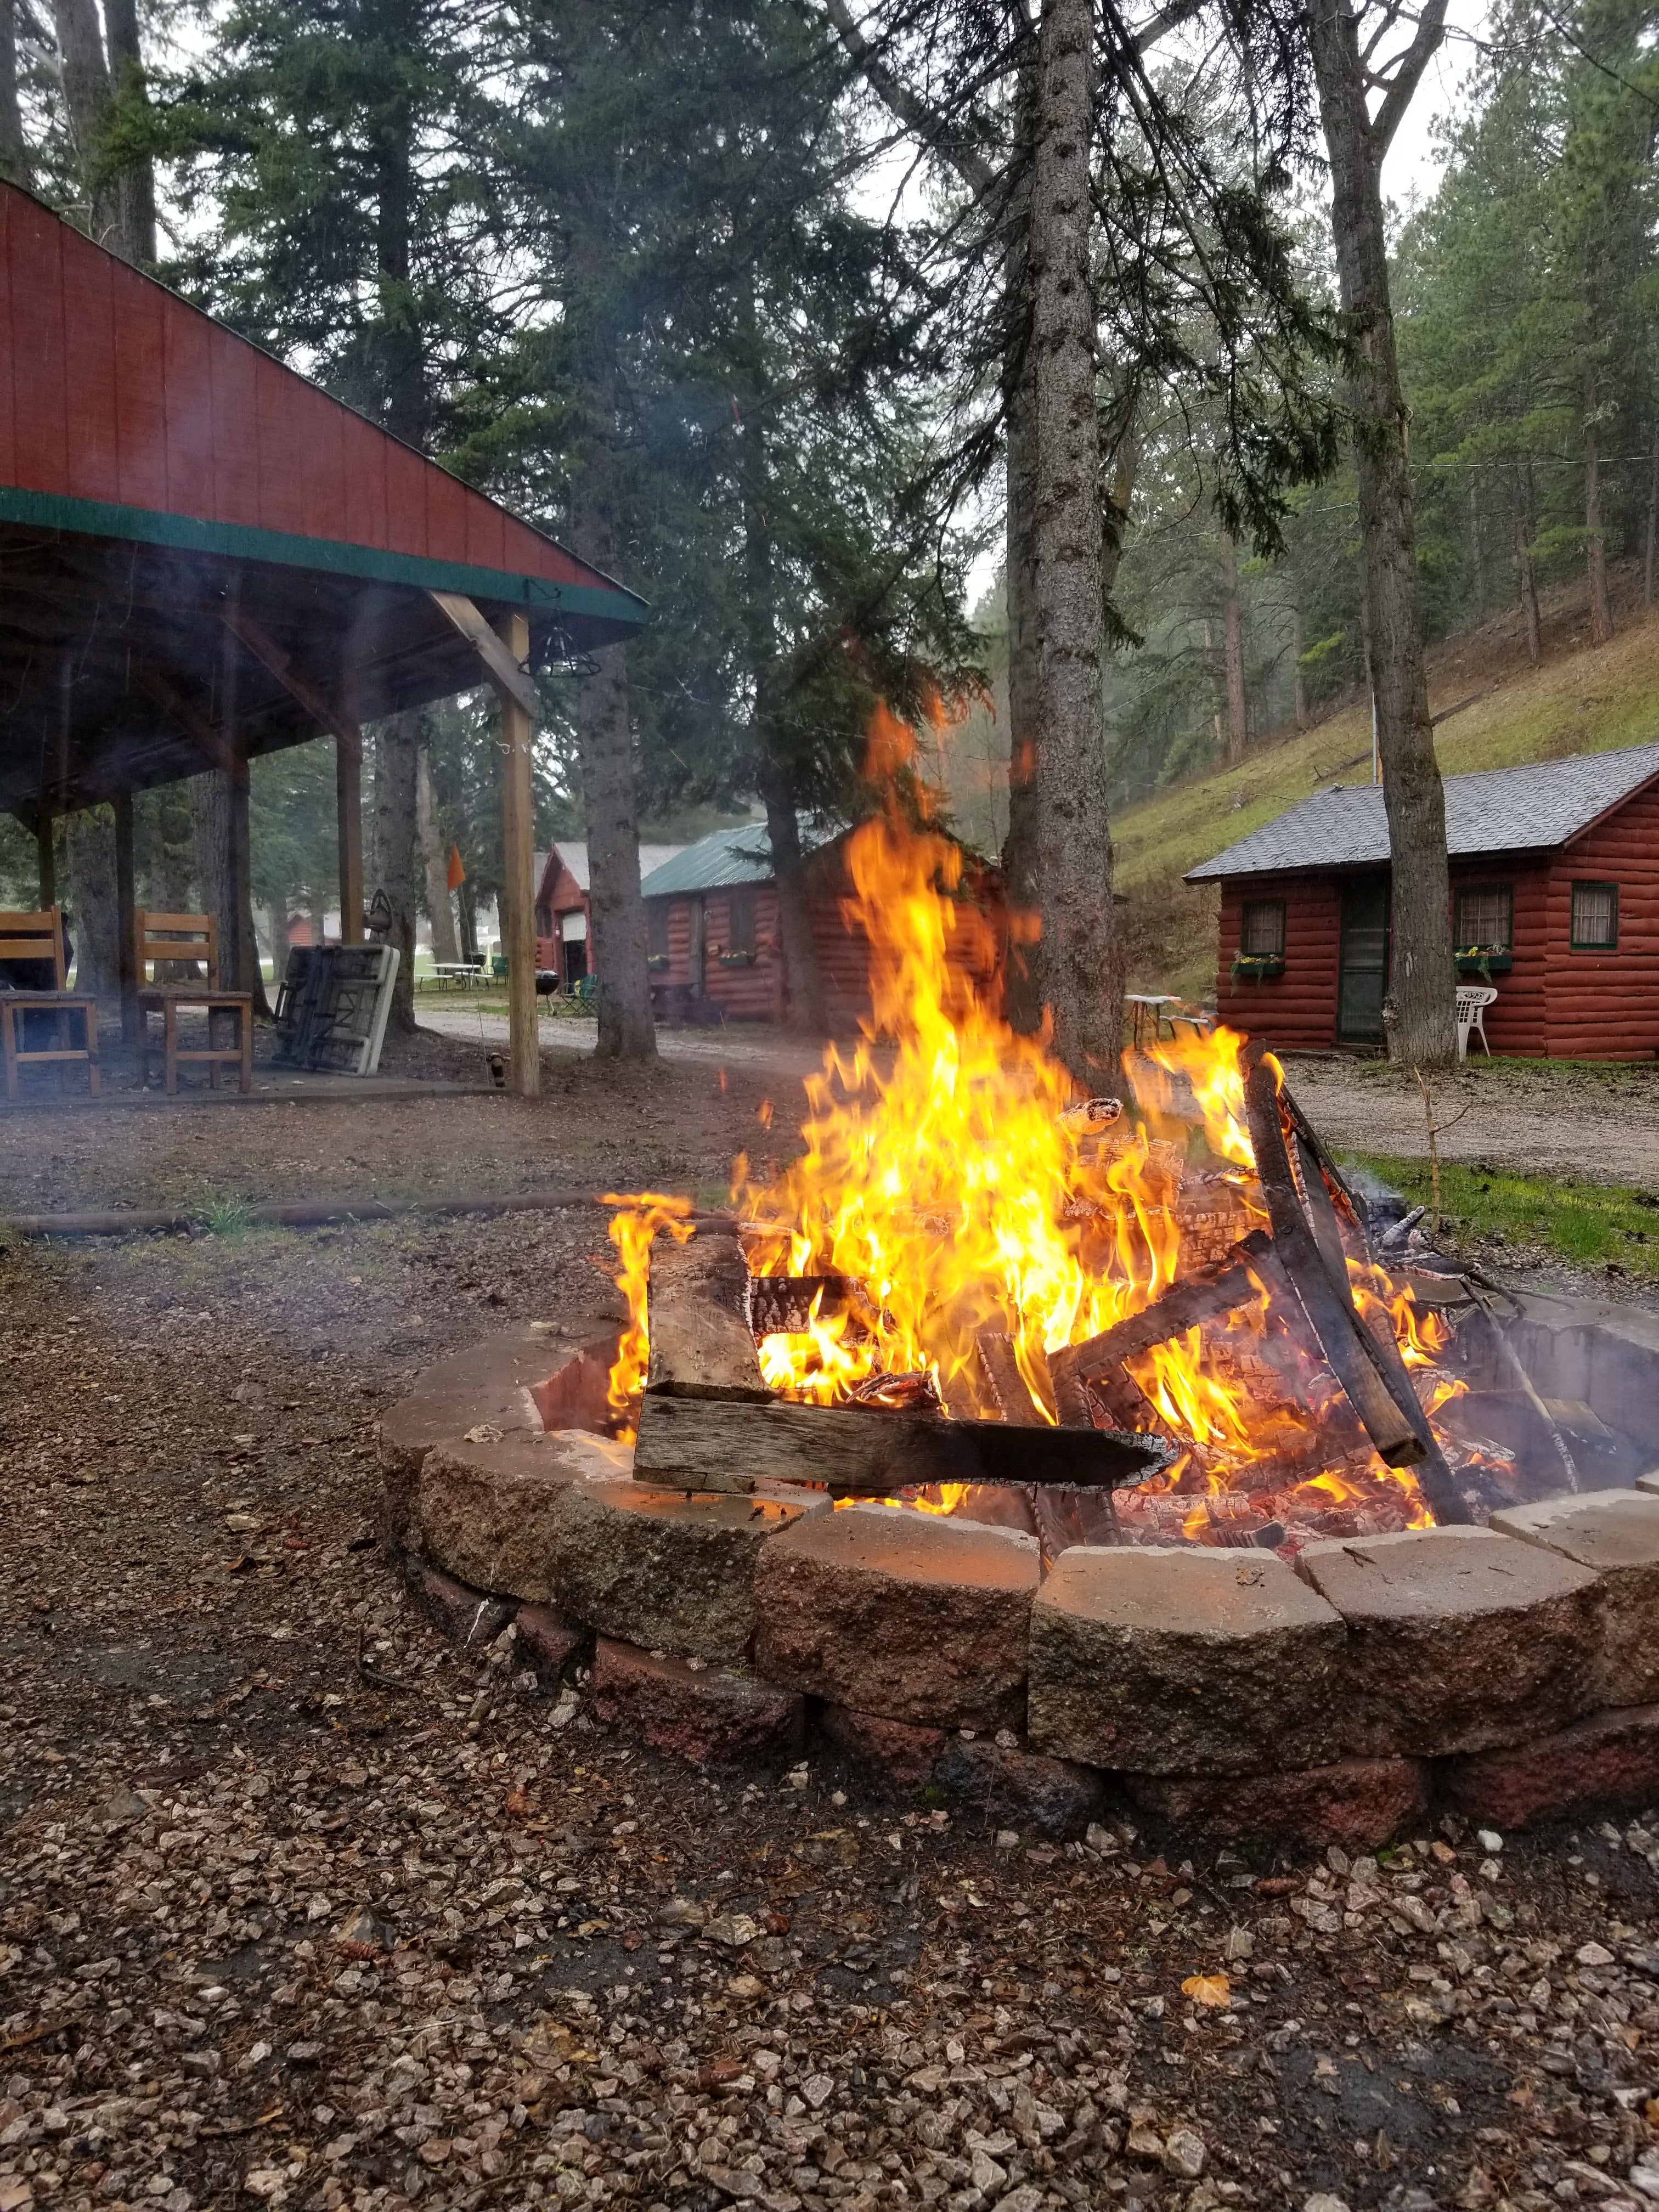 Camper submitted image from Wickiup Village Cabins - 5